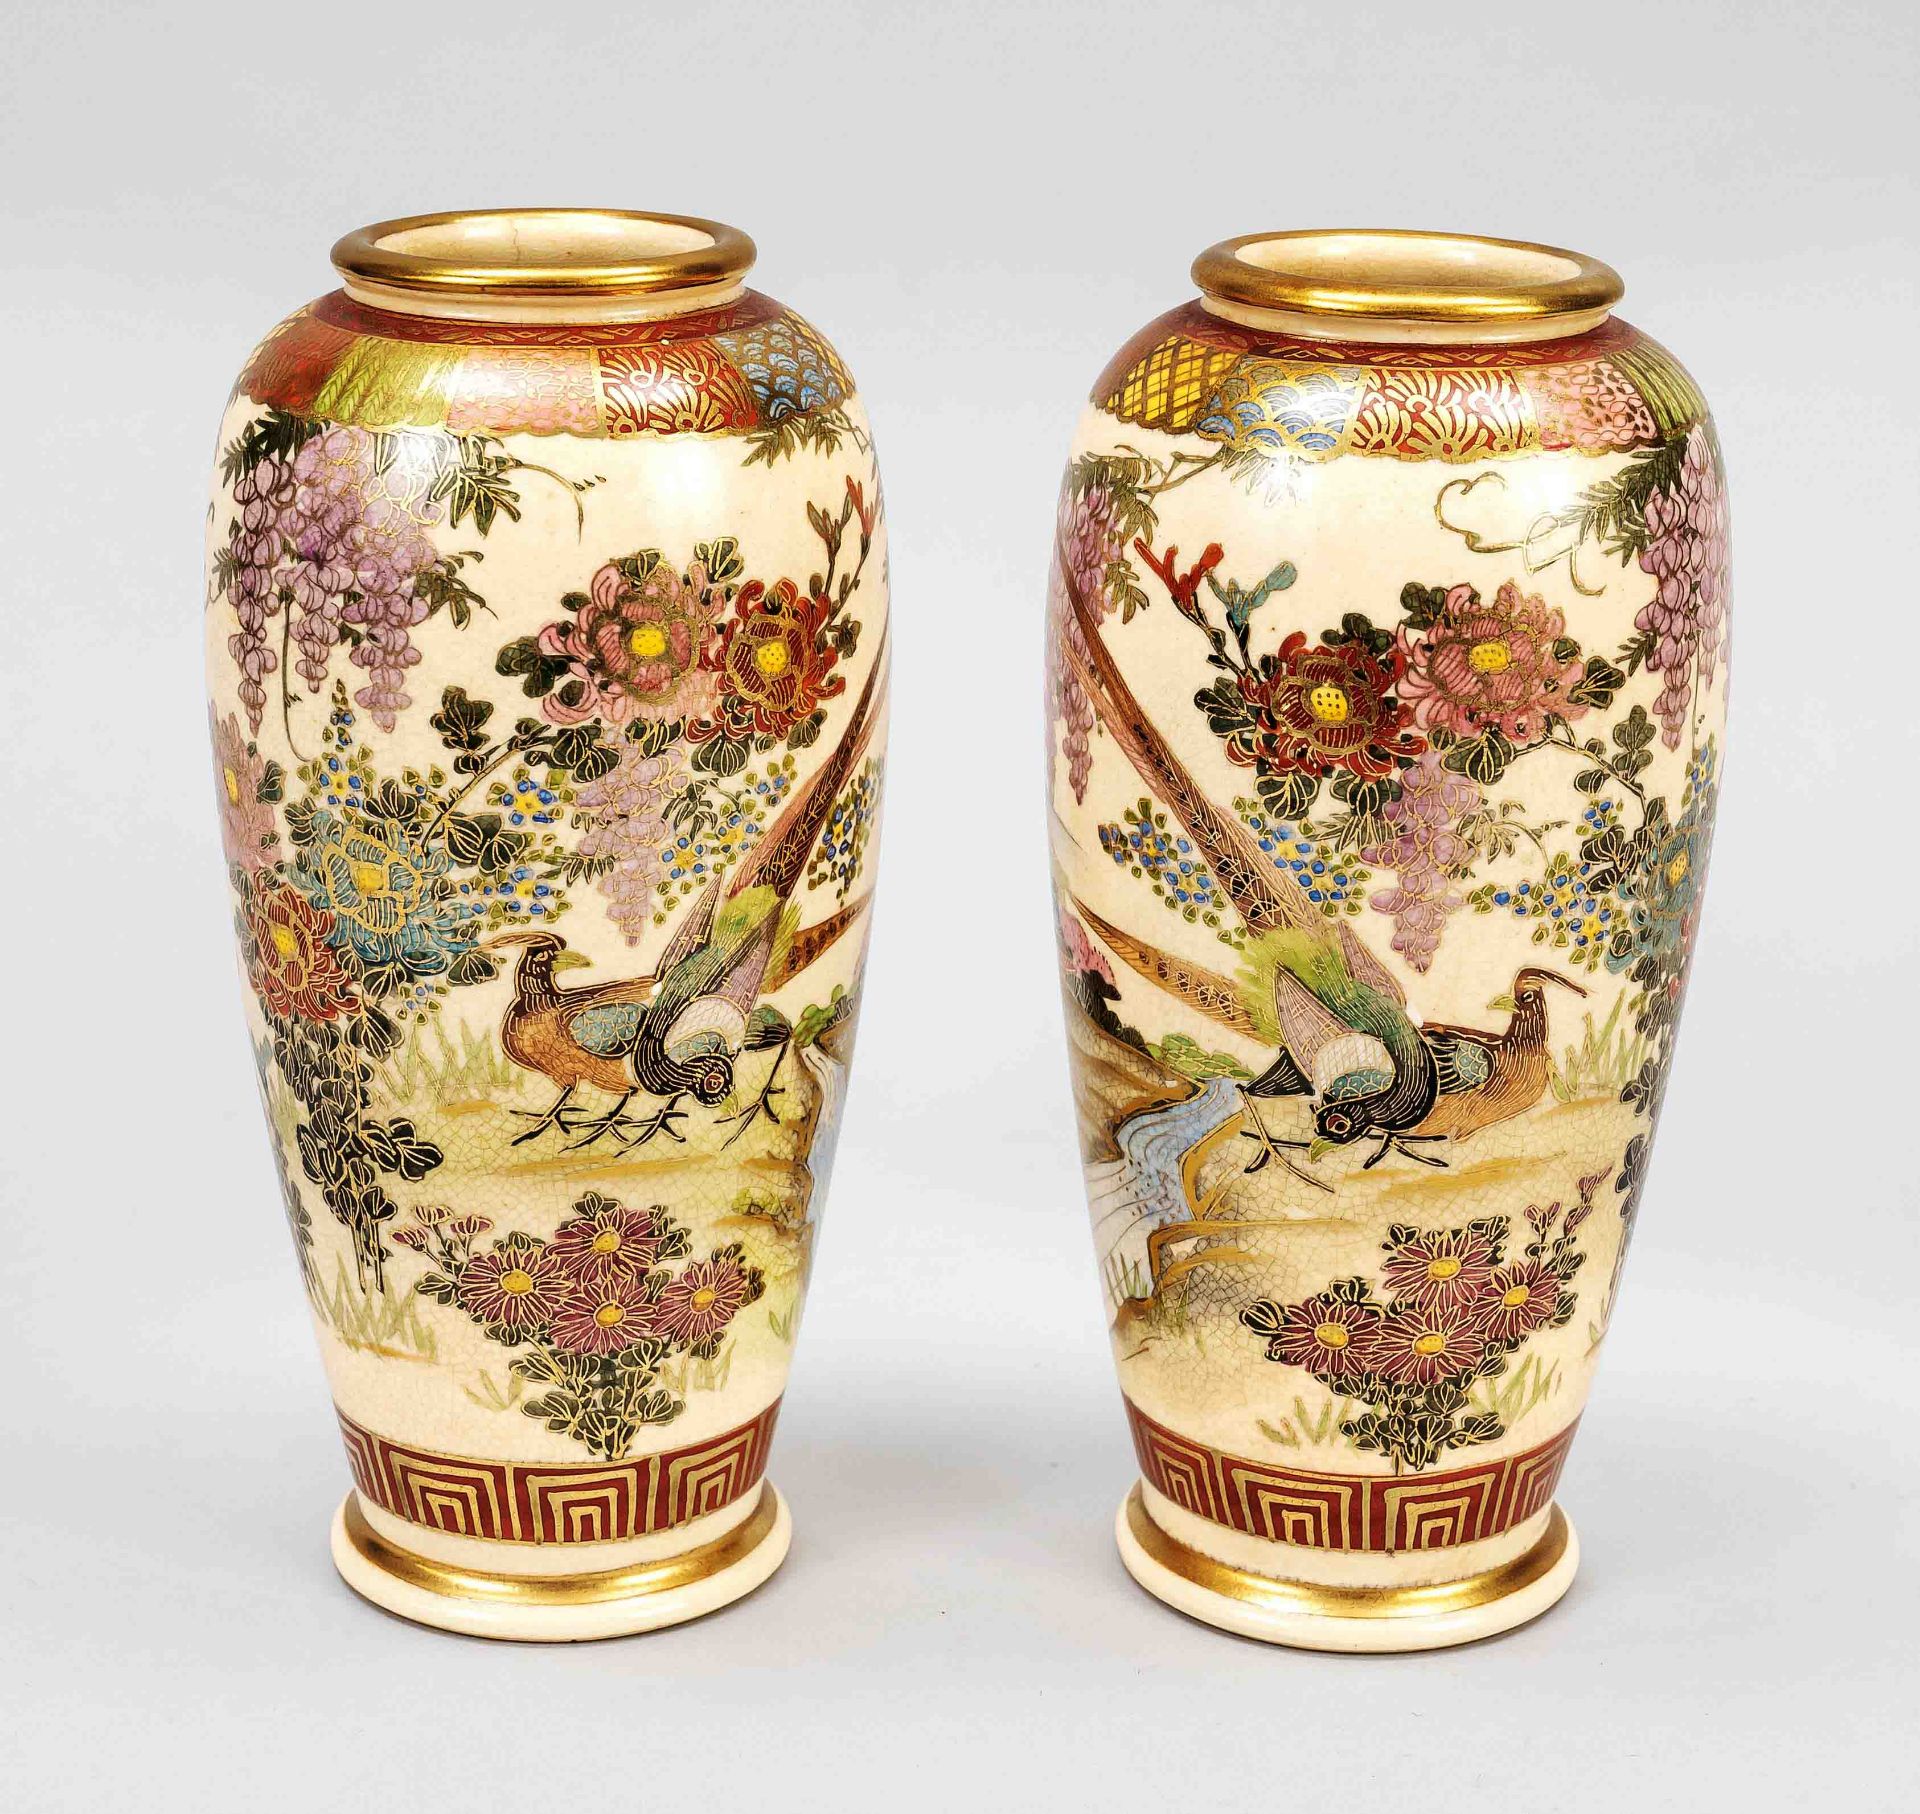 Pair of Satsuma vases, Japan, 20th c., beautiful large flower vases with ivory colored body and fine